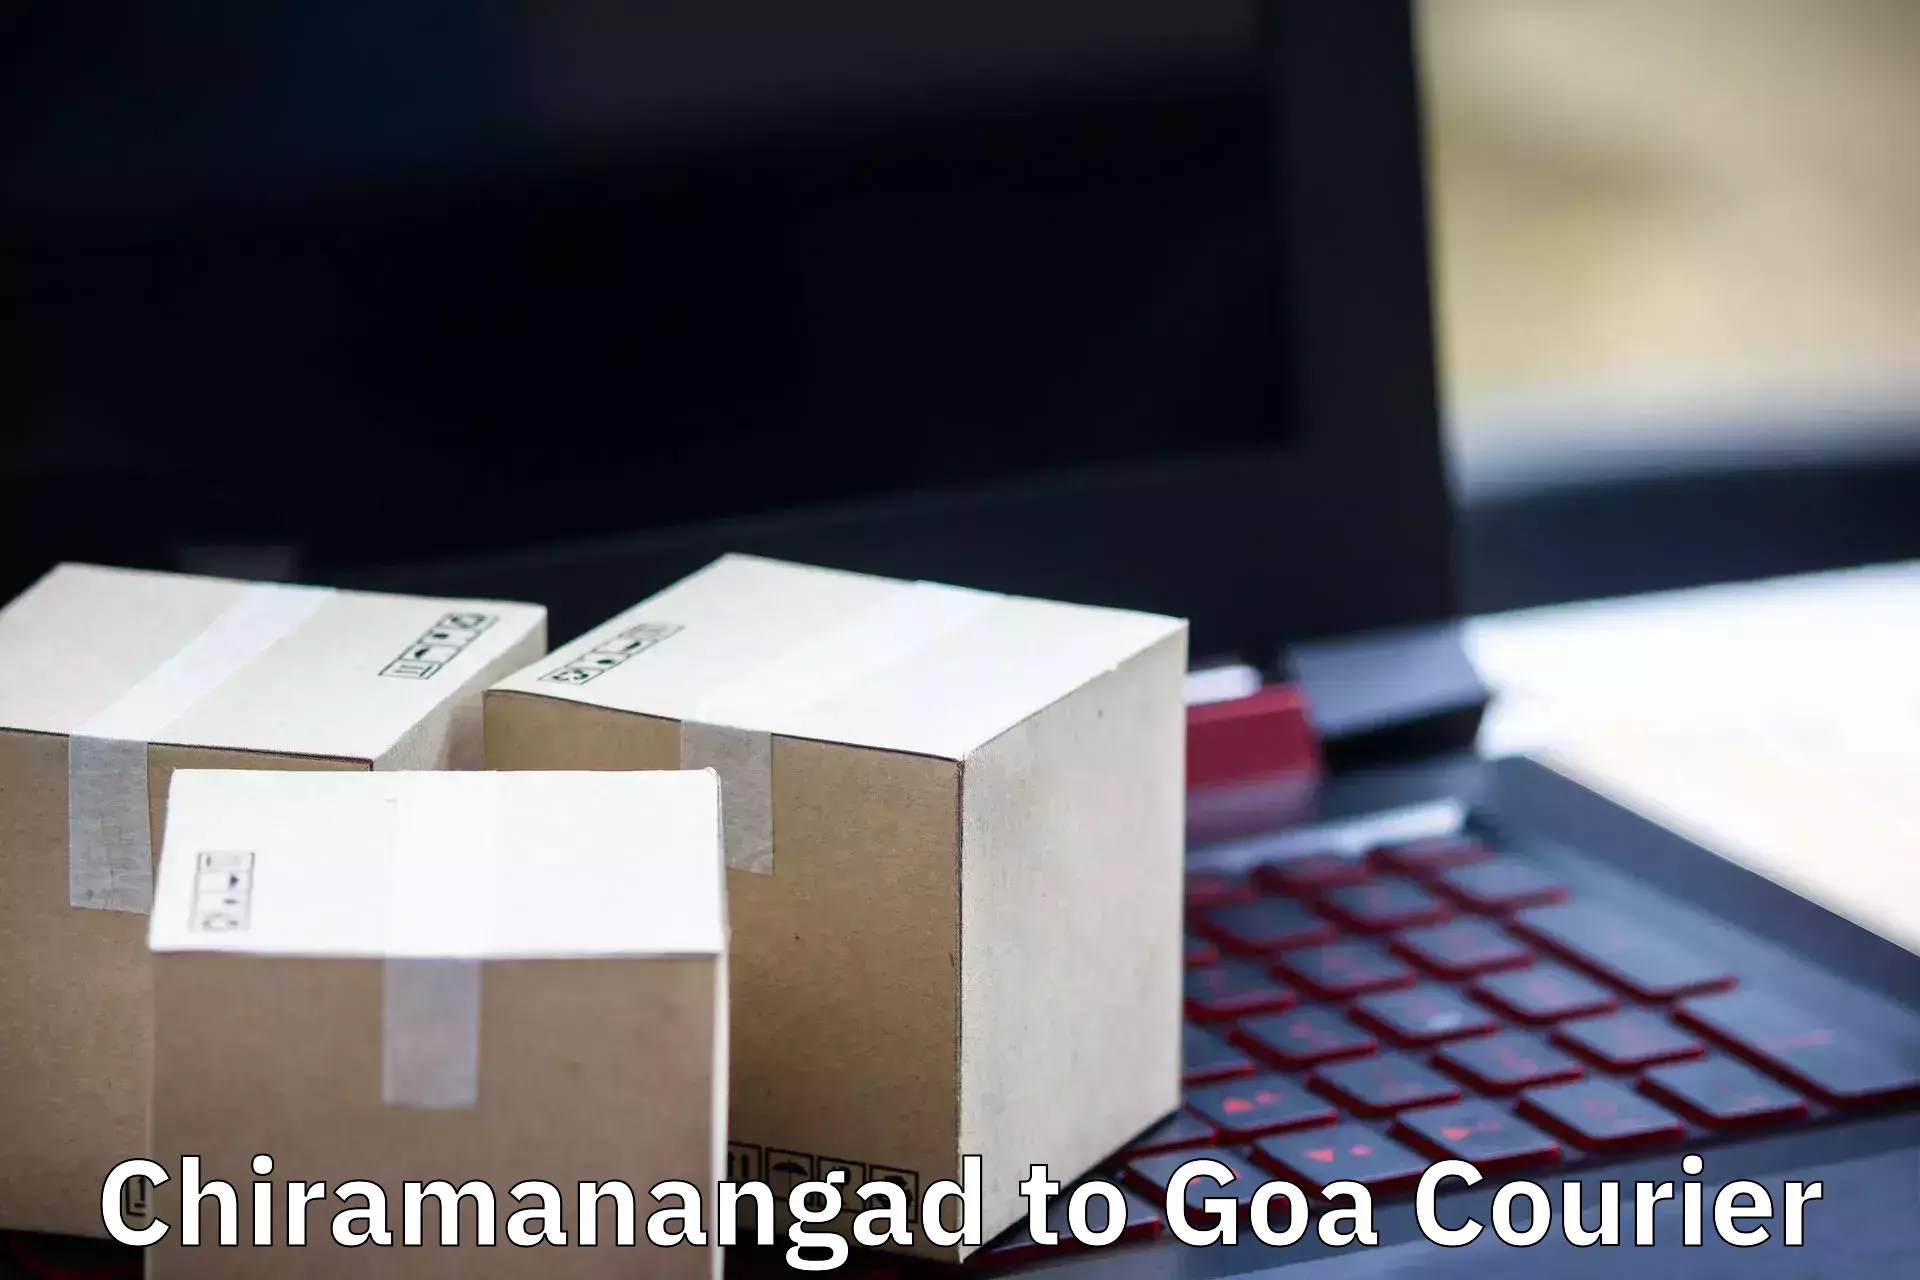 Quality relocation services Chiramanangad to South Goa